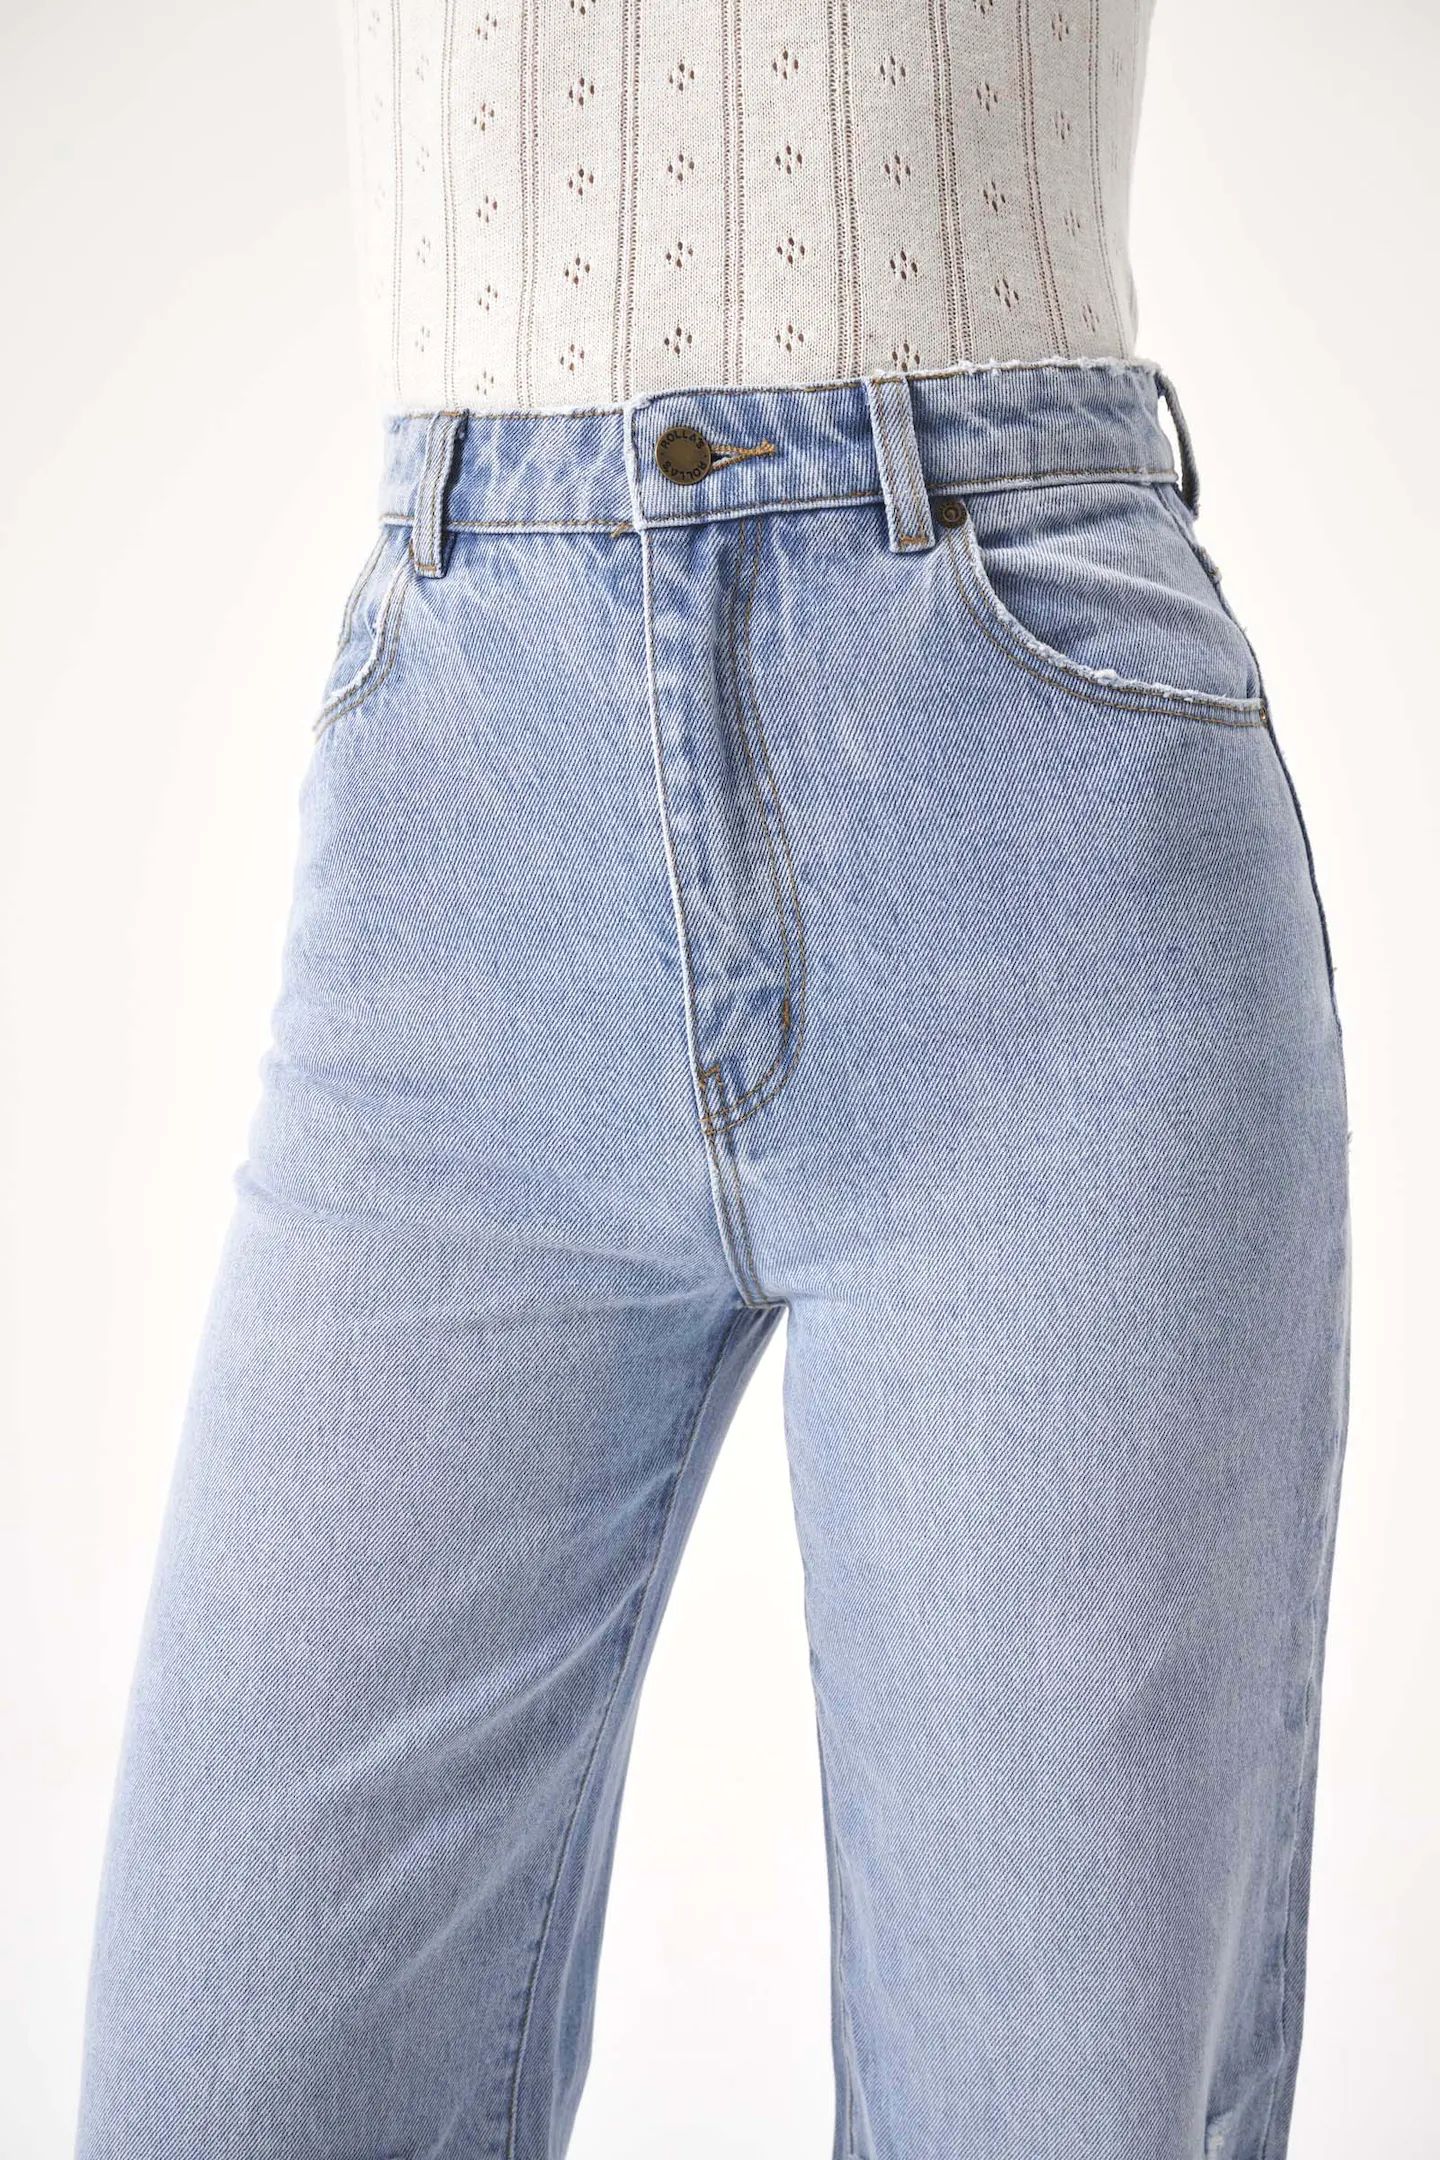 Heidi Jean Ankle - Old Stone | Rolla's Jeans US/CAN